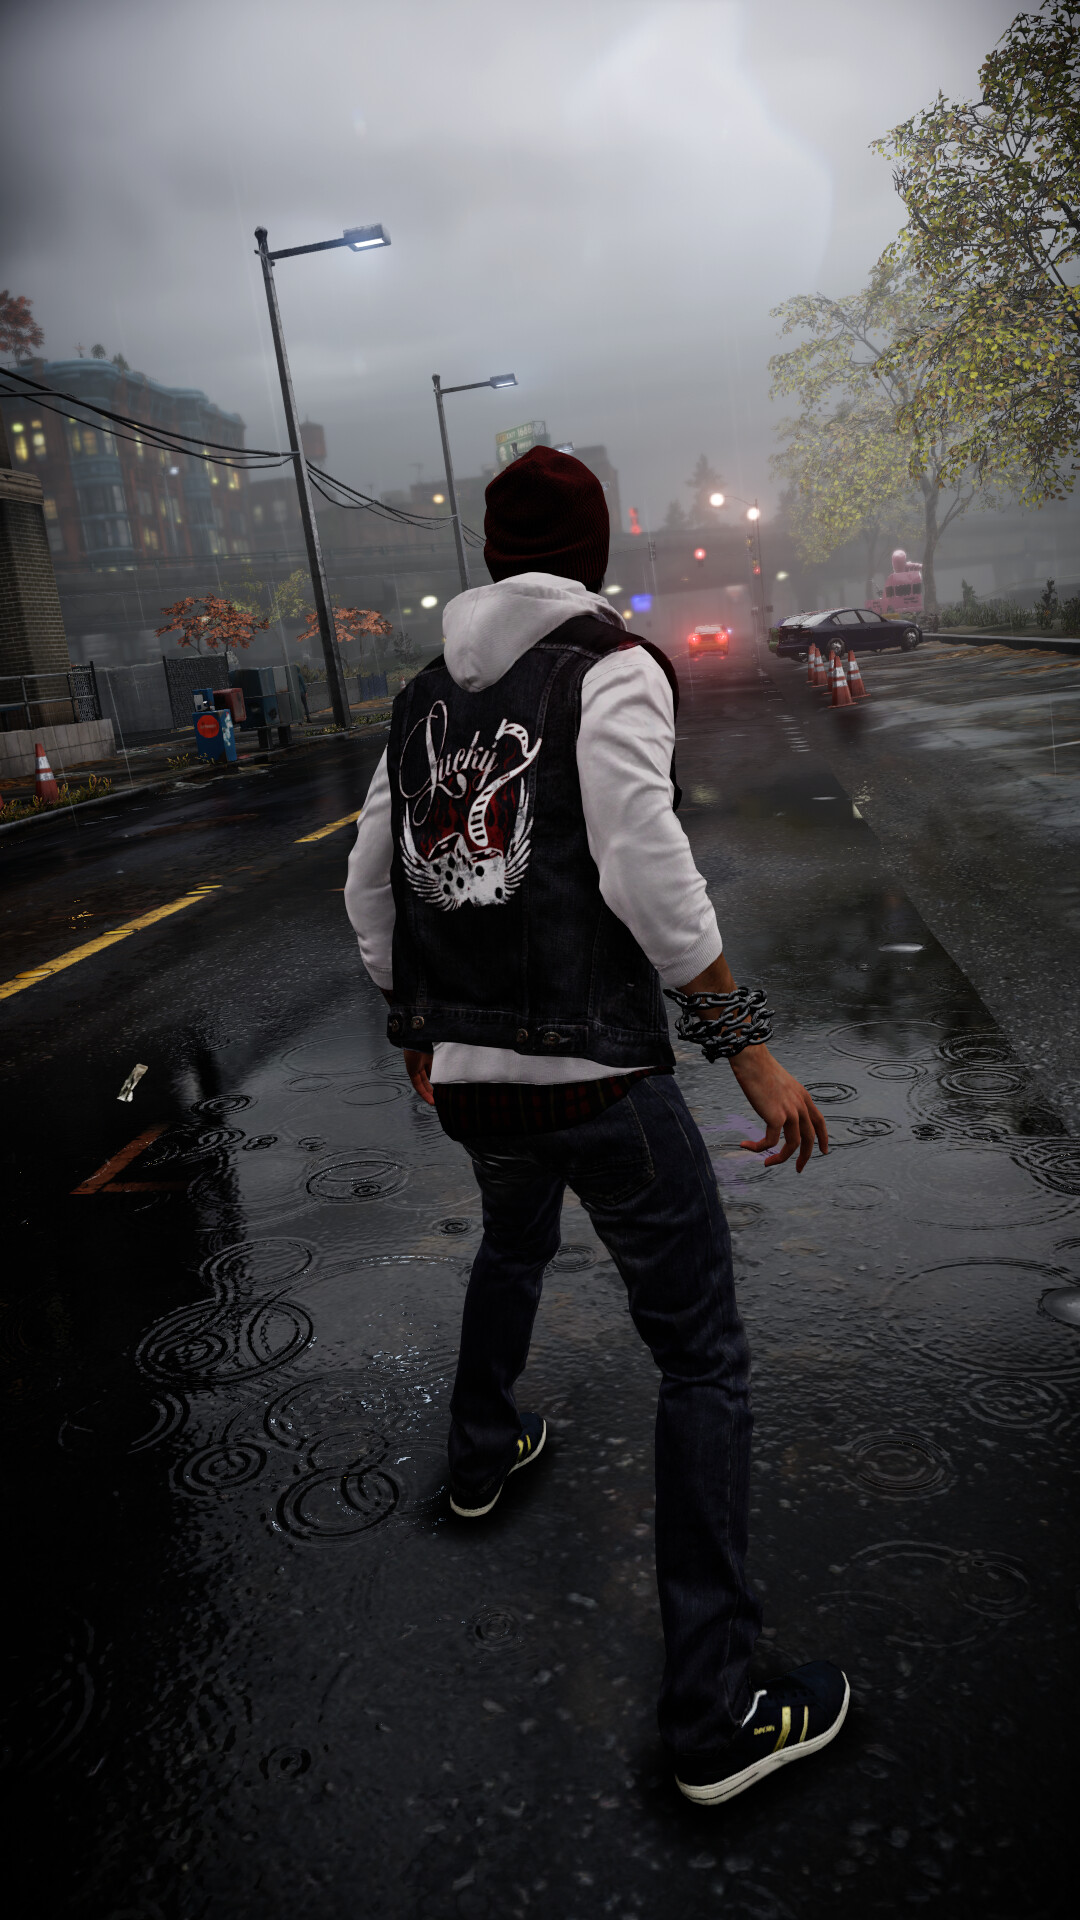 inFAMOUS: Second Son, The player-controlled protagonist, possesses superpower abilities. 1080x1920 Full HD Wallpaper.